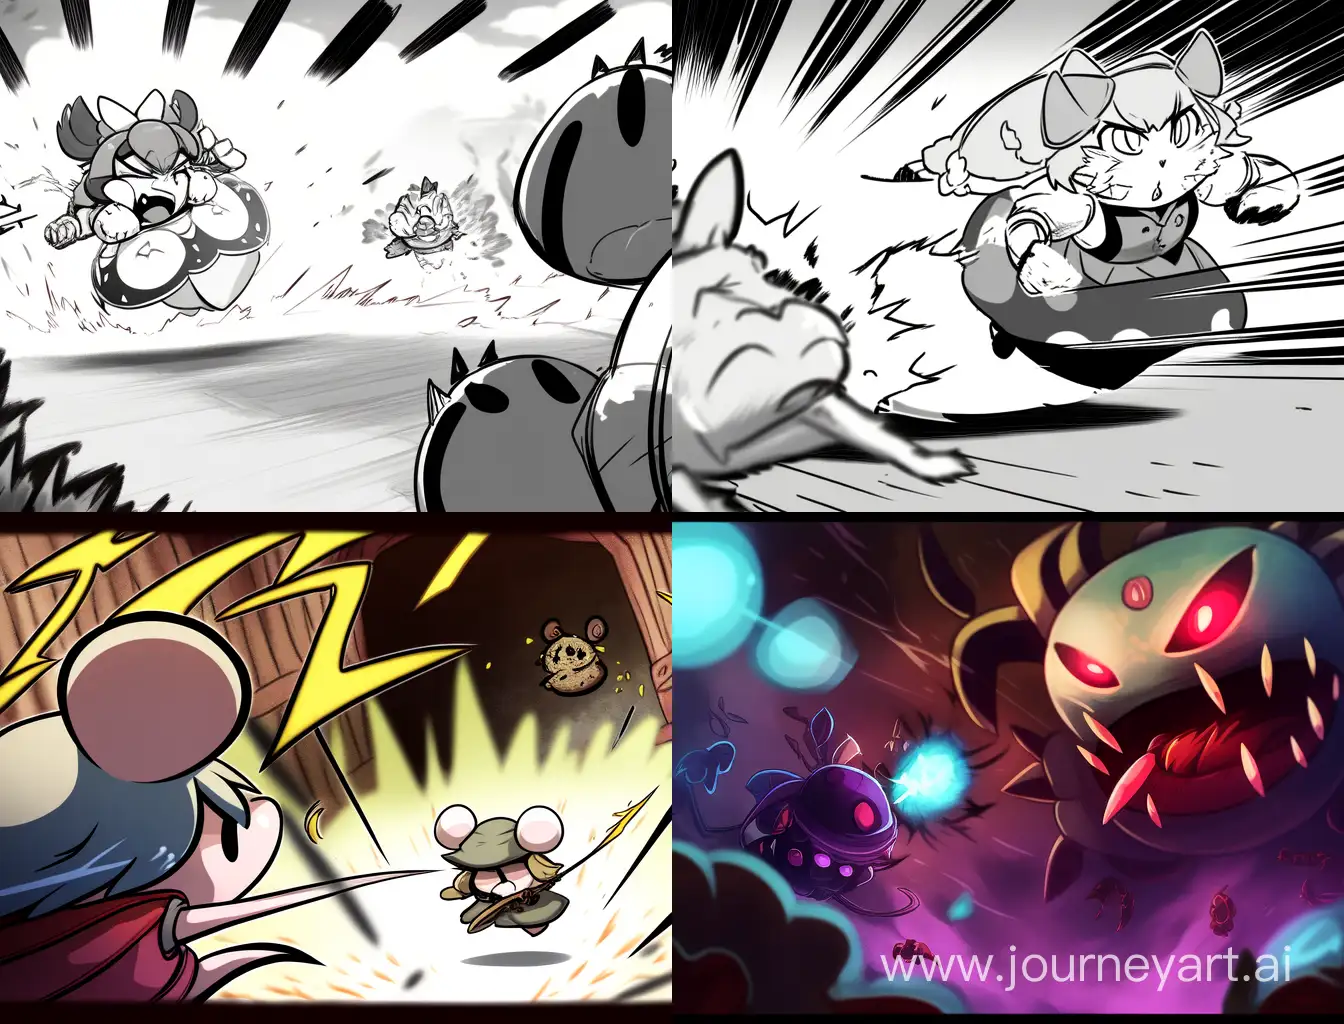 Intense-Toad-vs-Mouse-Battle-in-Niji-4